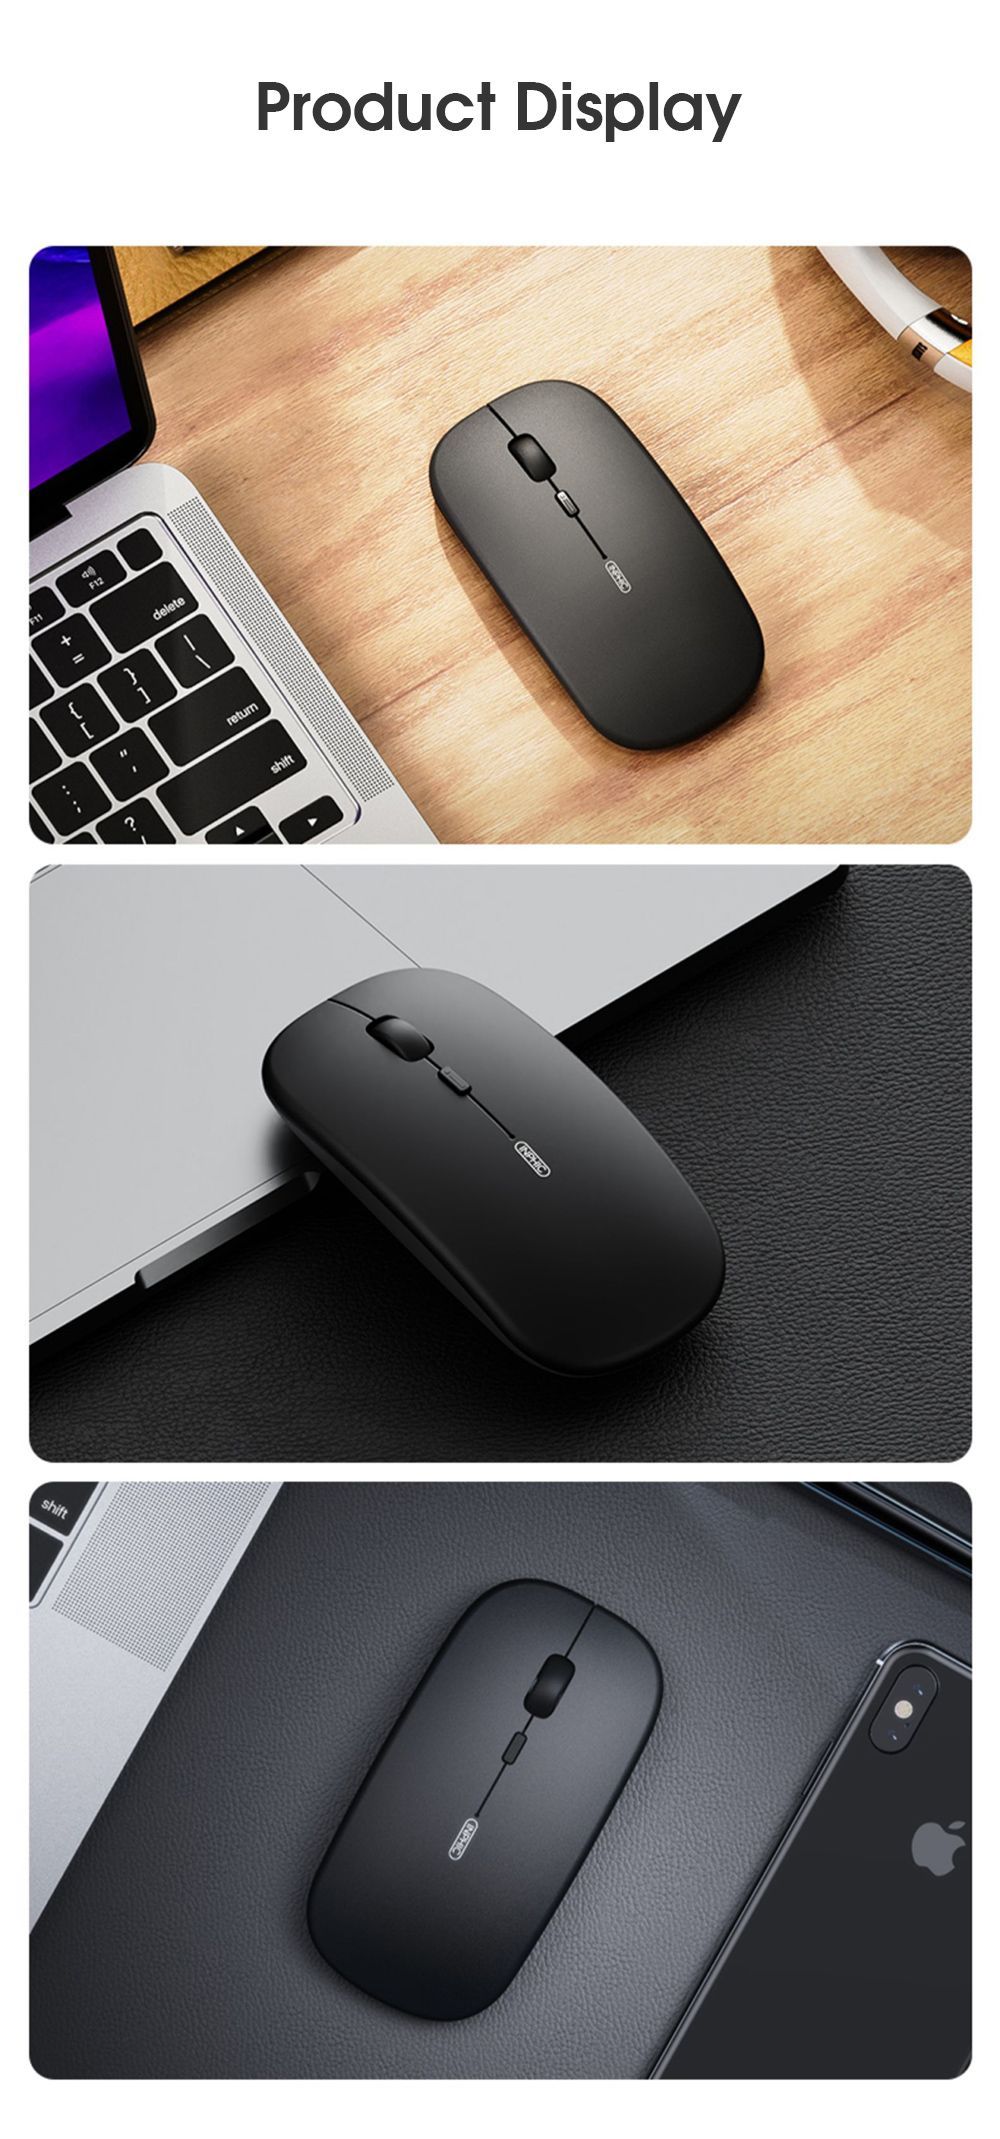 Inphic-M2B-Wireless-Rechargeable-Mouse-bluetooth-50-Wireless-Optical-Mice-for-PC-Laptop-Computer-1735507